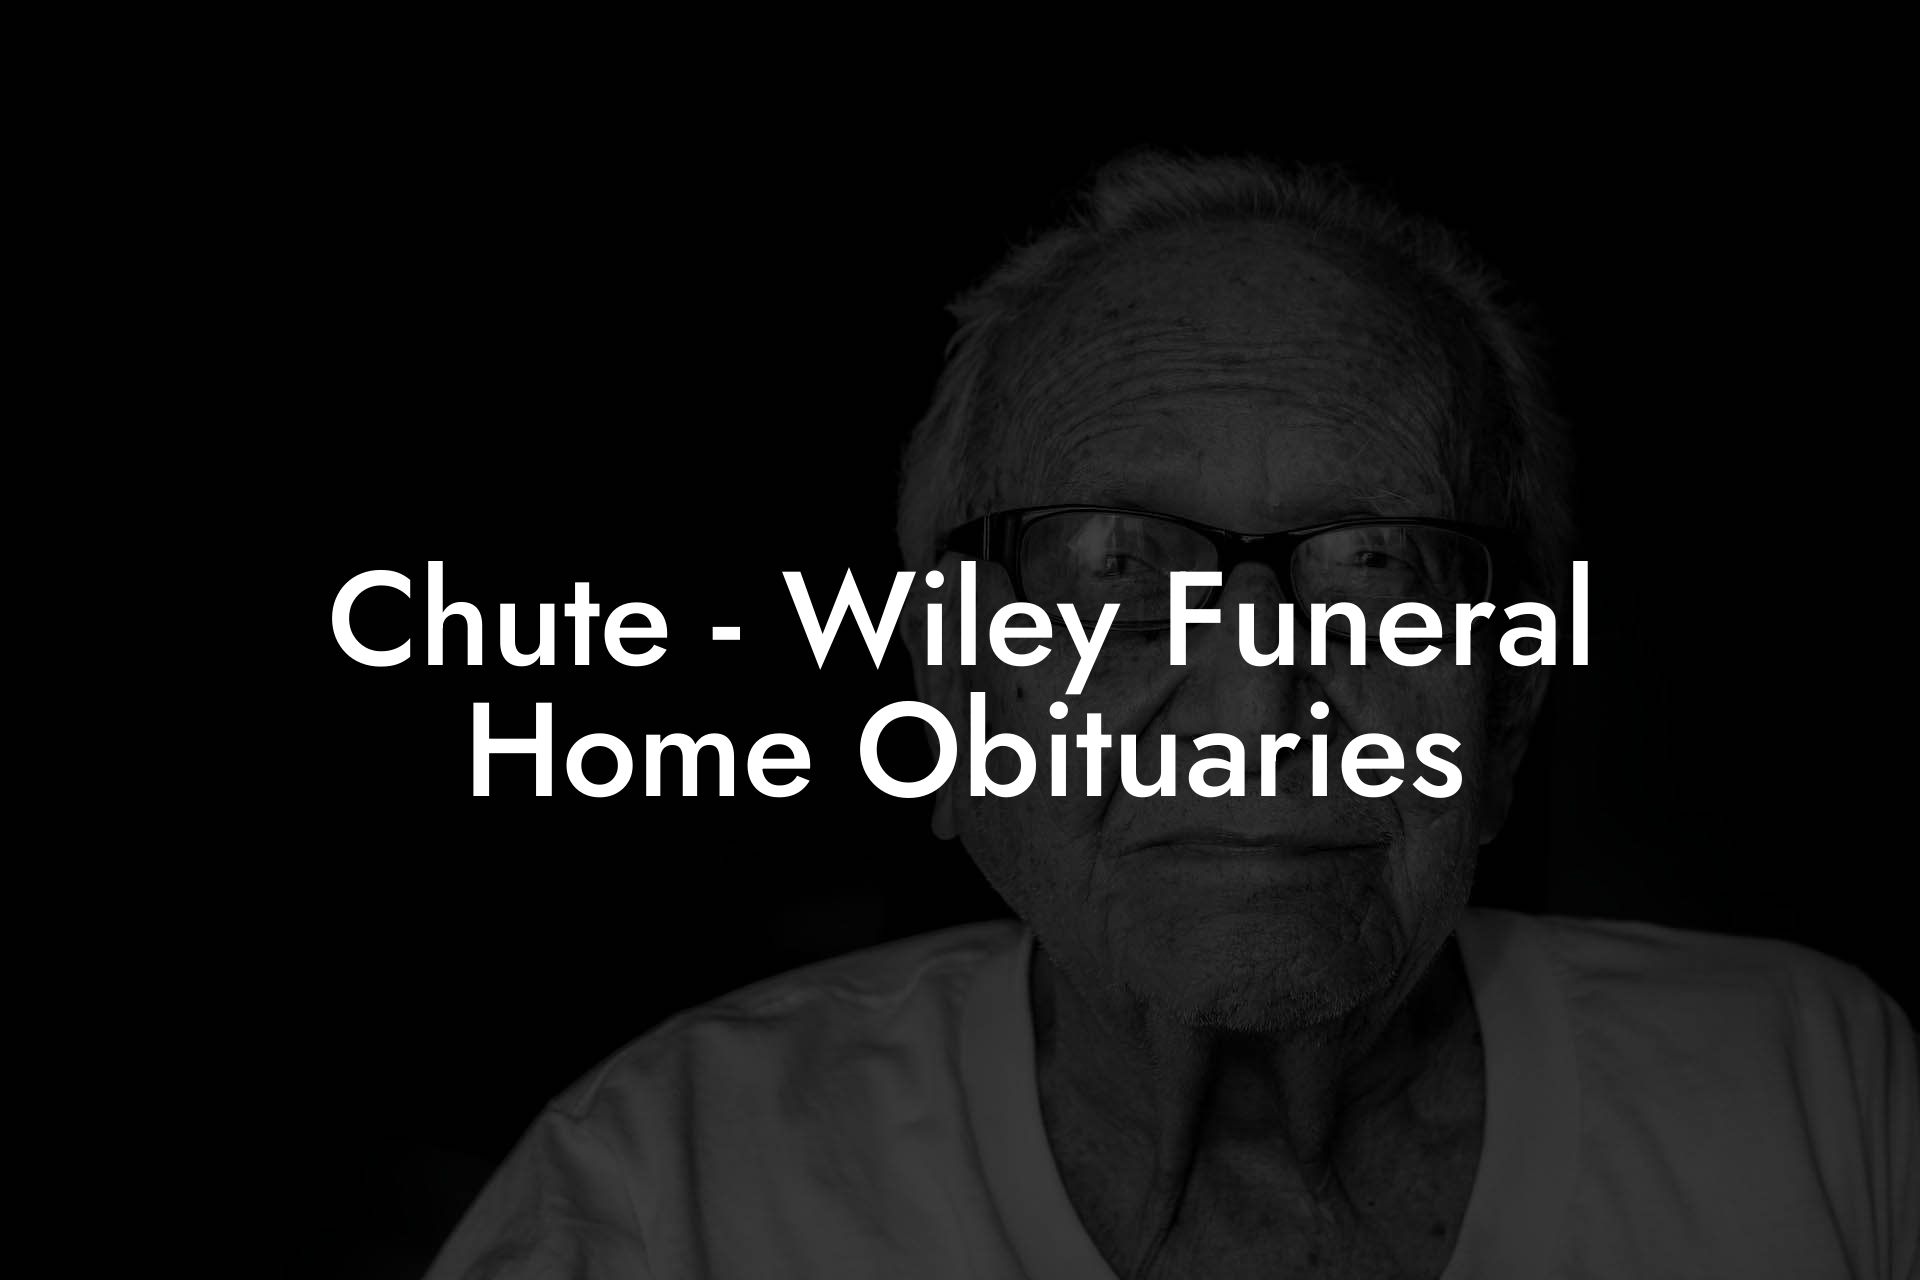 Chute - Wiley Funeral Home Obituaries